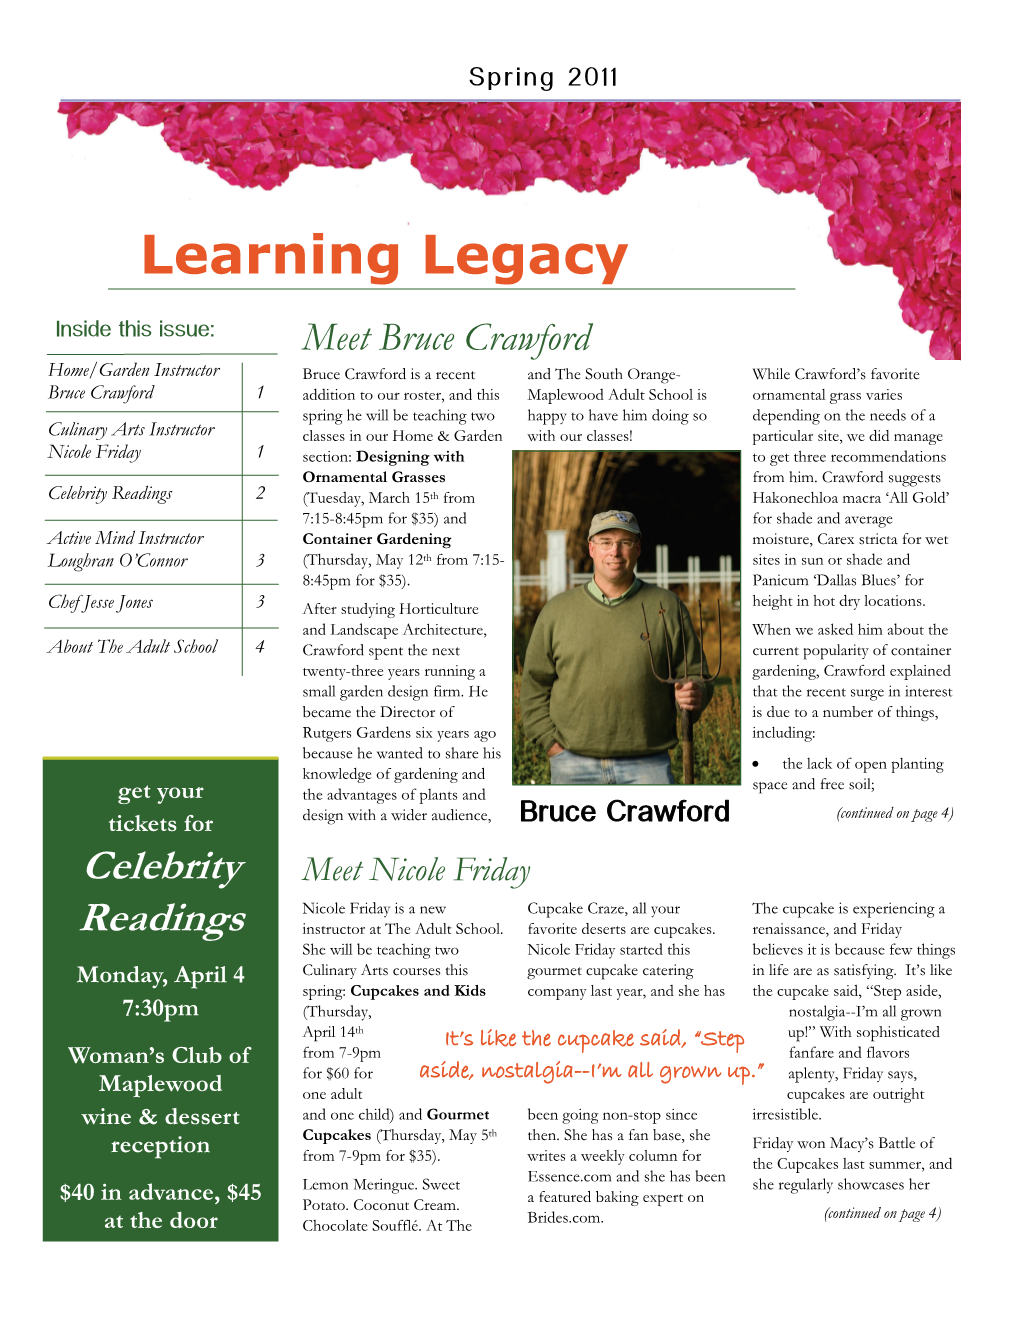 Learning Legacy